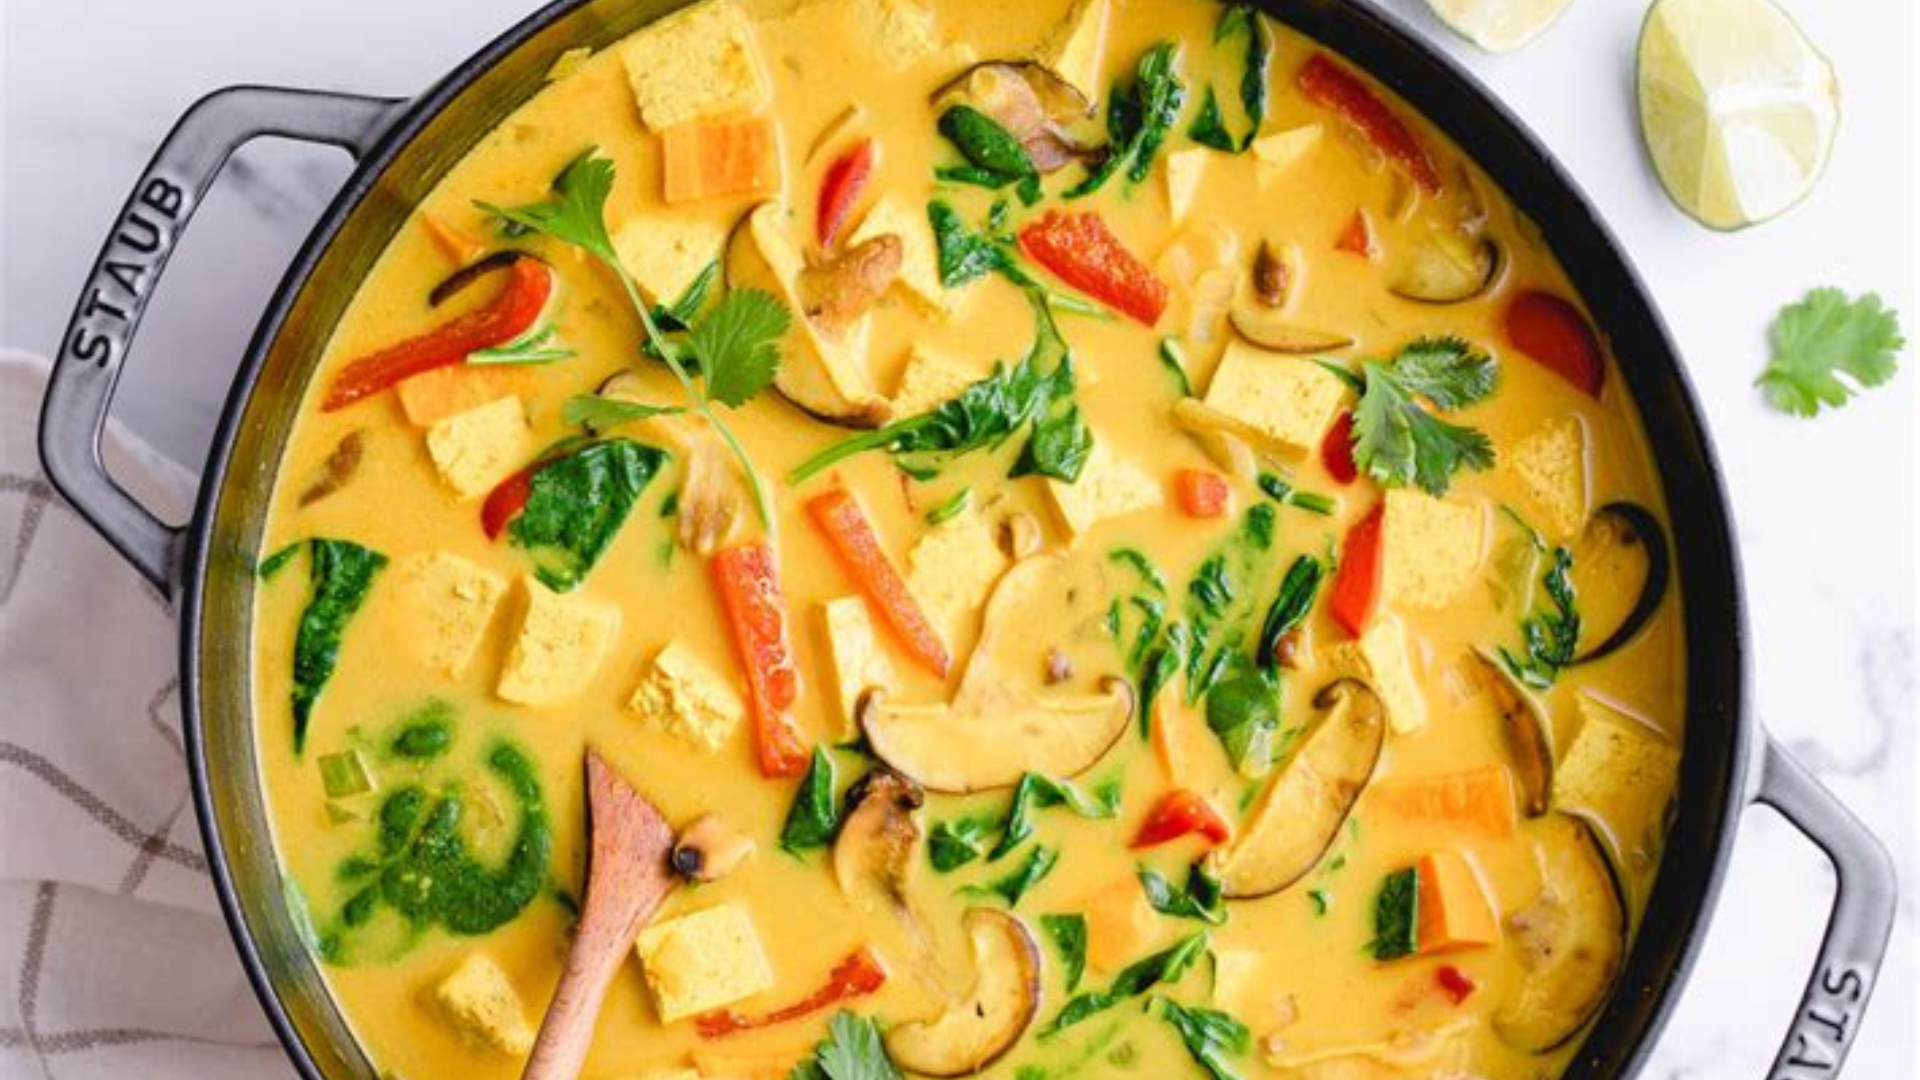 rainbow yellow curry with tofu, red peppers, mushrooms, spinach, and herbs in a black .